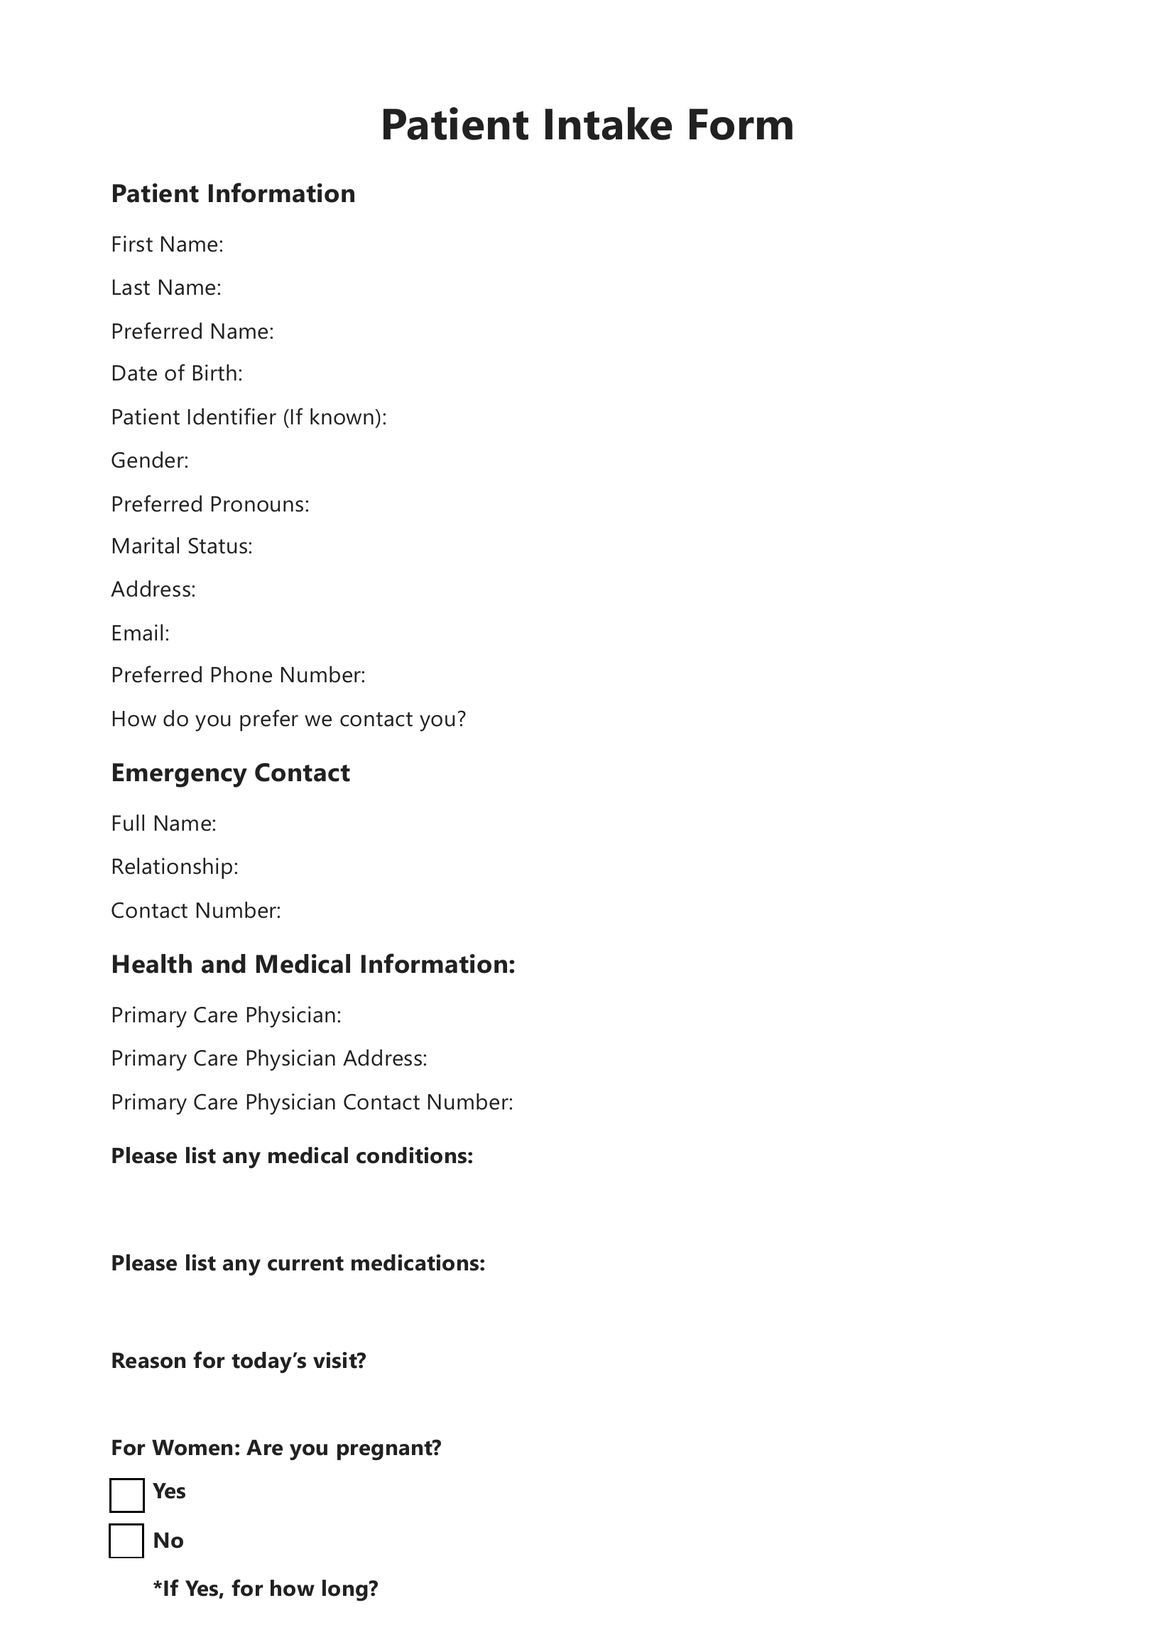 Patient Intake Forms PDF Example